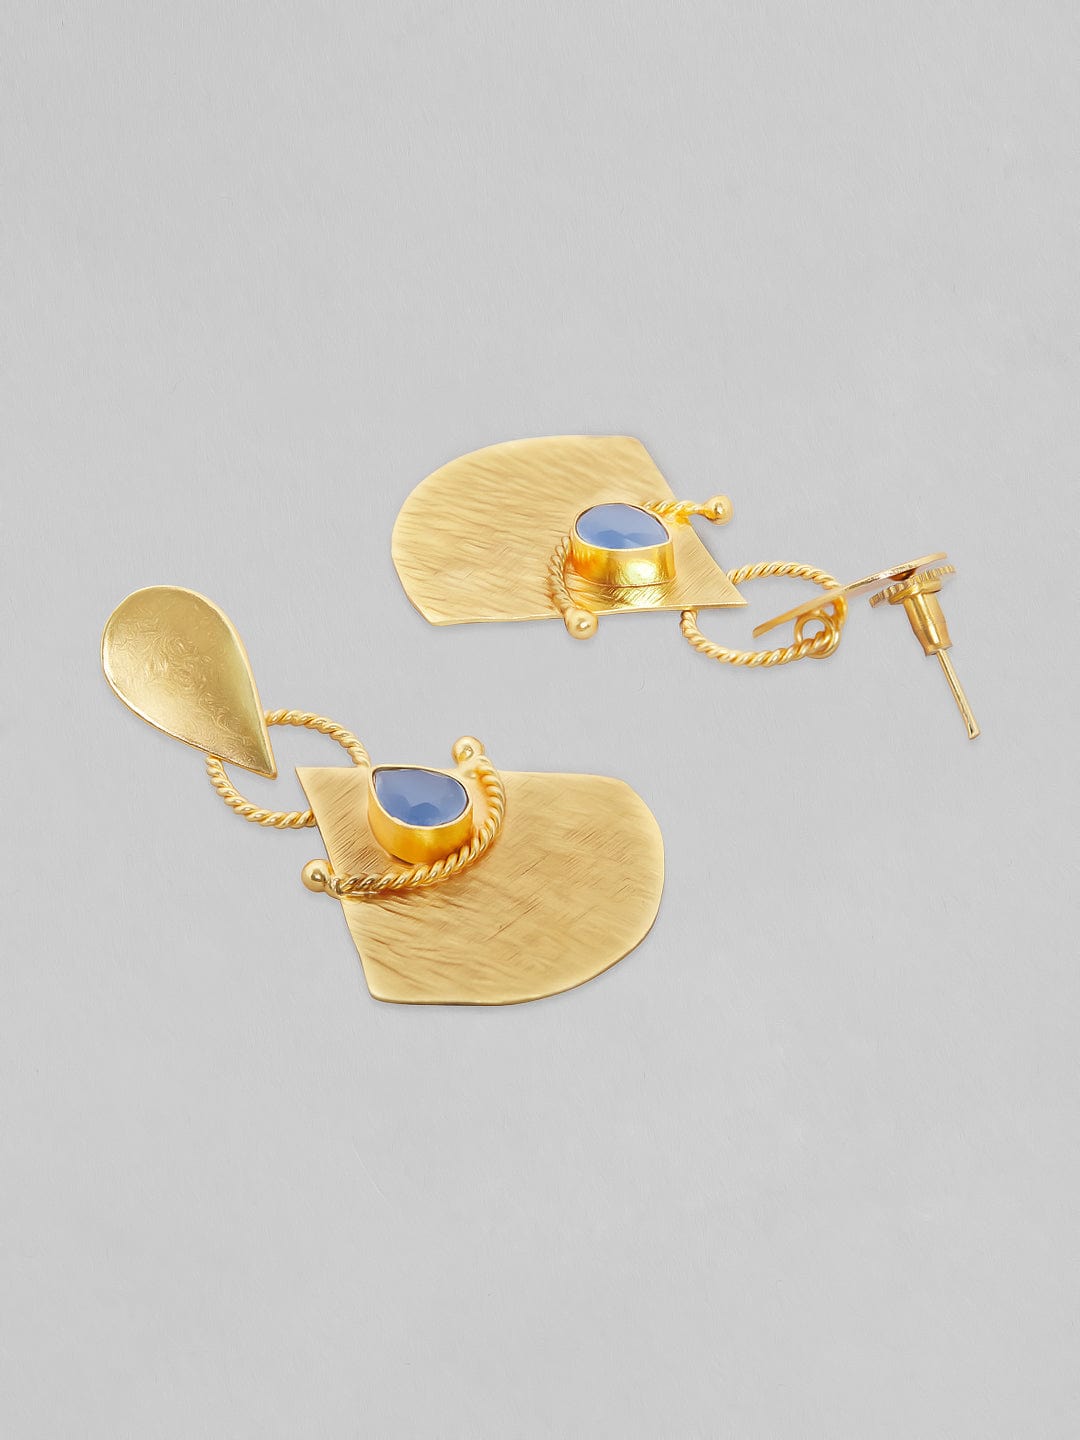 Rubans Voguish 18K Gold Plated On Copper Handcrafted With Aqua Stone Textured Dangle Earrings. Earrings